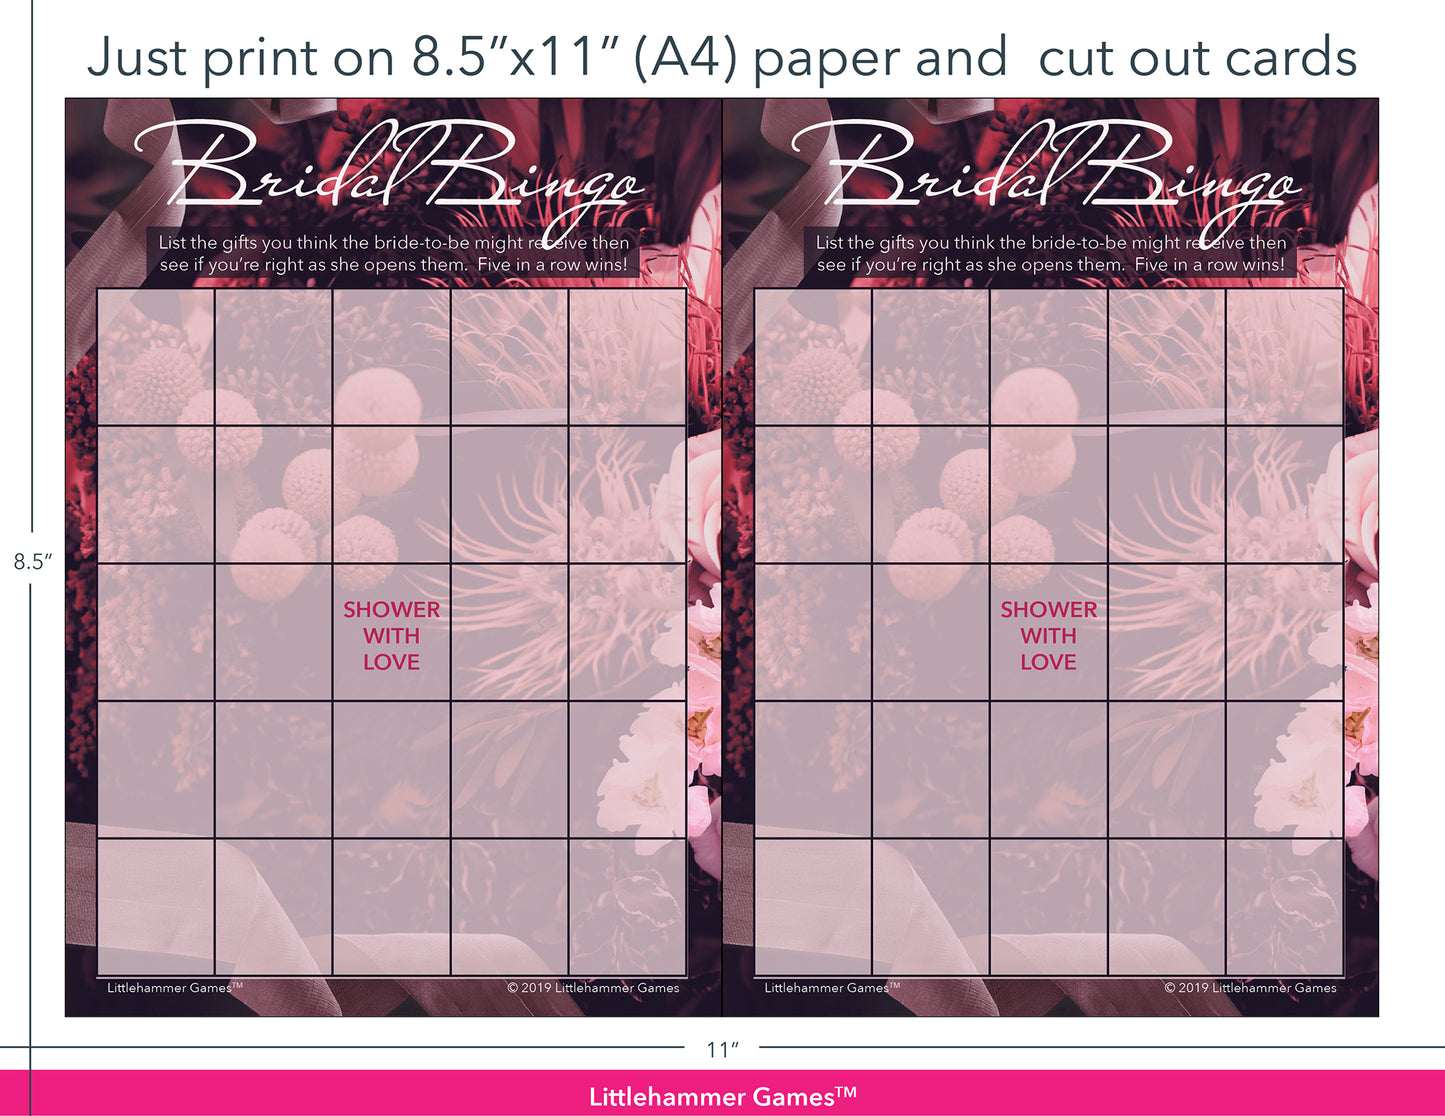 Dark floral Bridal Gift Bingo game cards with printing instructions